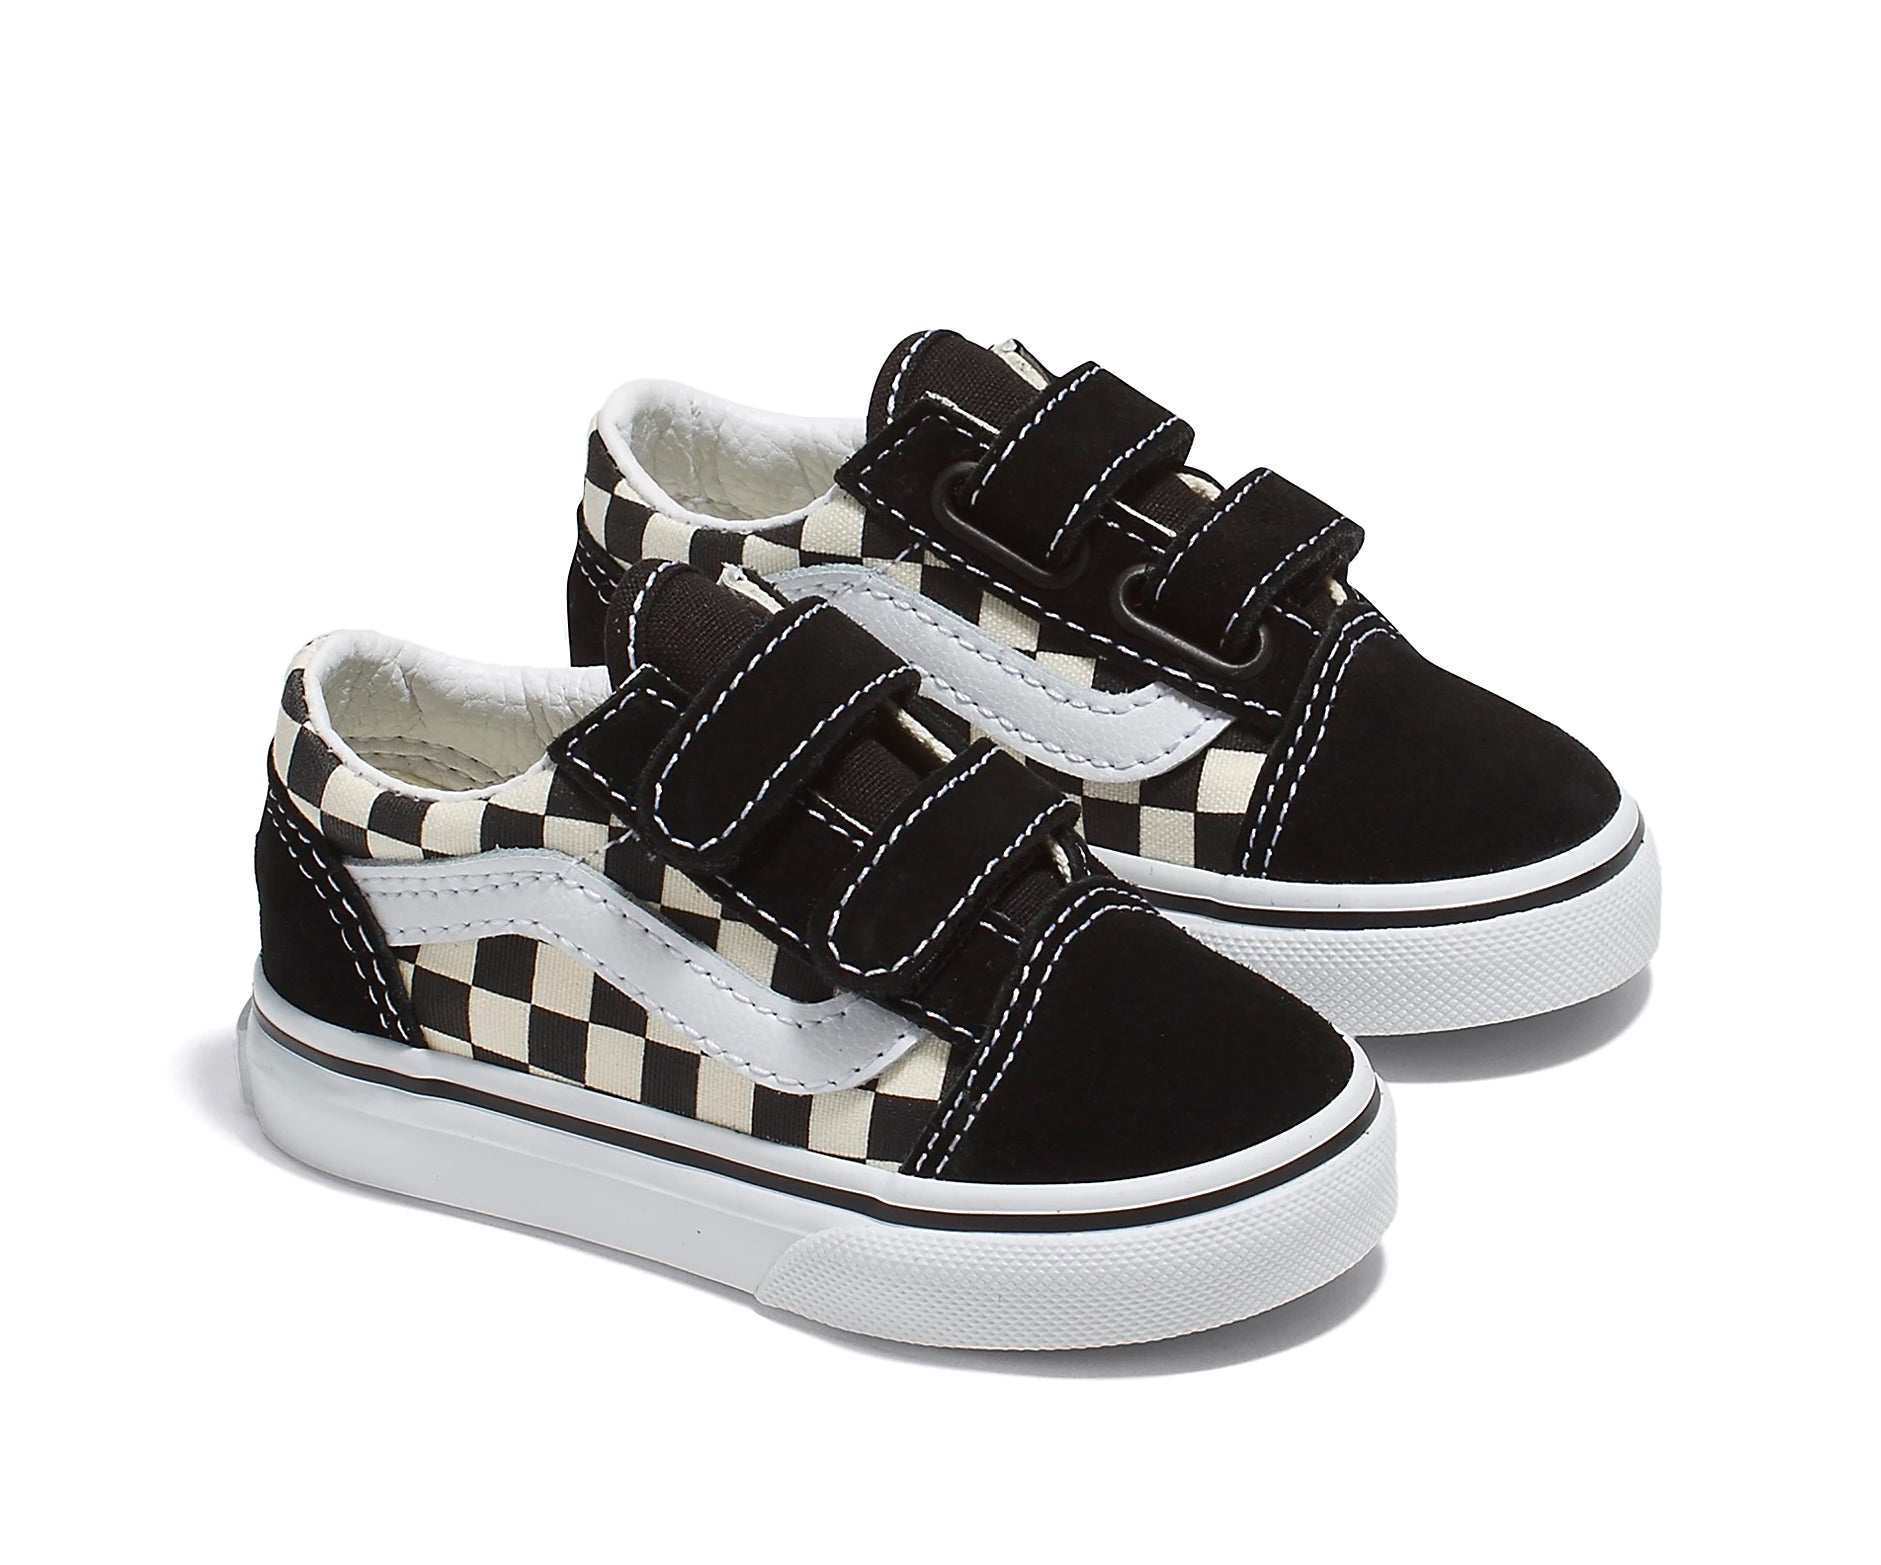 A checkerboard black and white canvas and suede kids' sneaker with velcro straps.